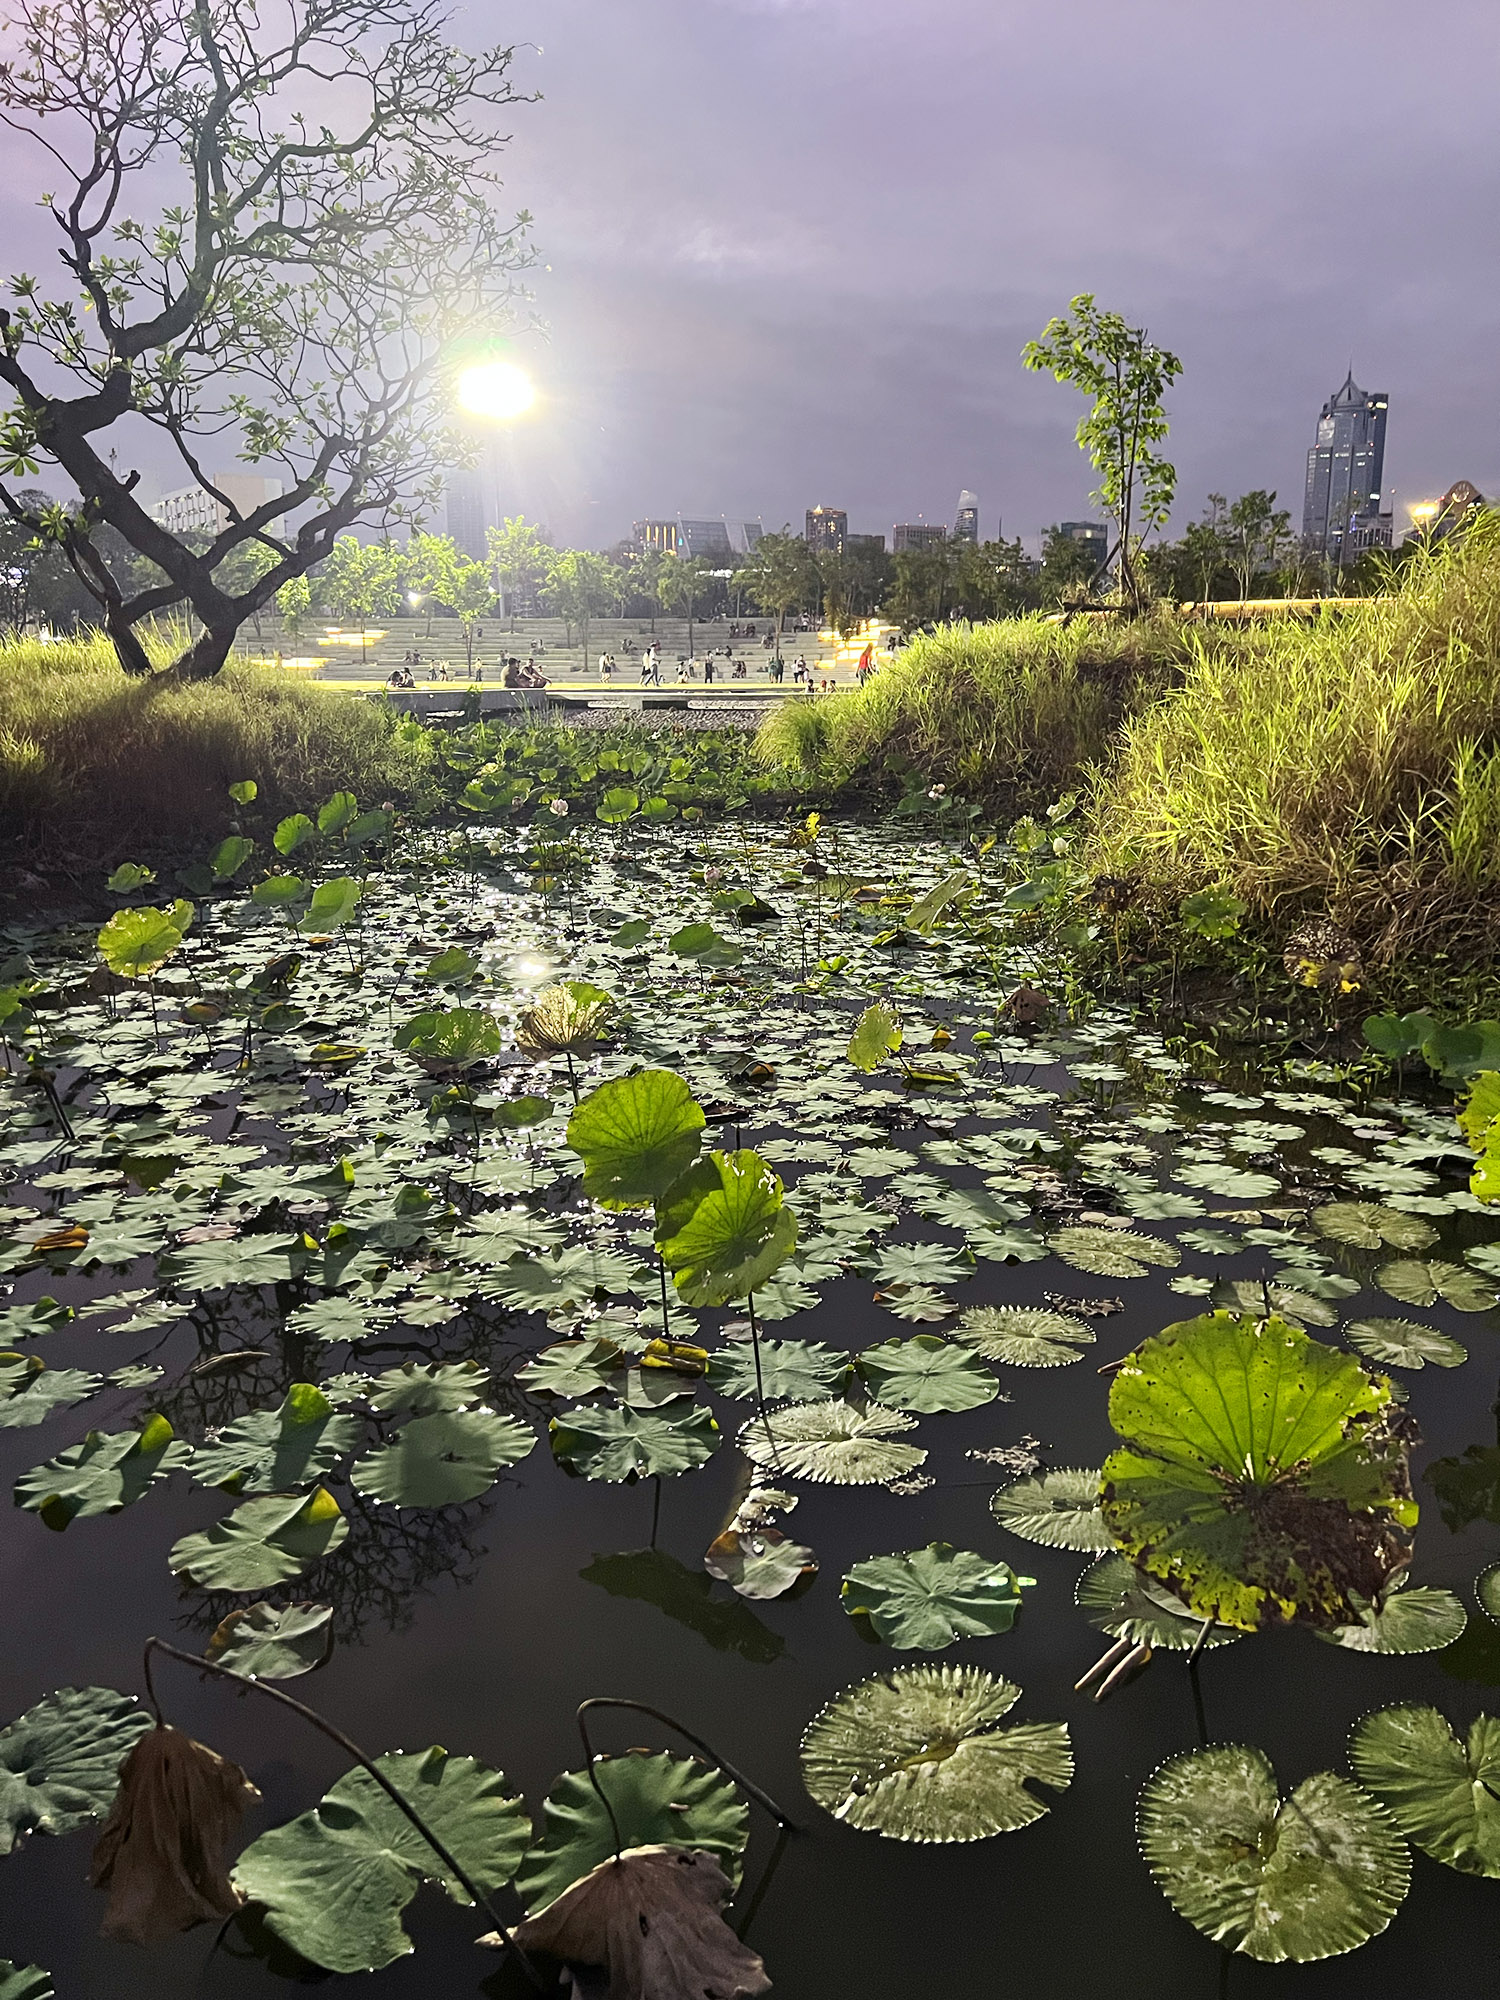 Bangkok: Benchakitti Forest Park - A green oasis in the city